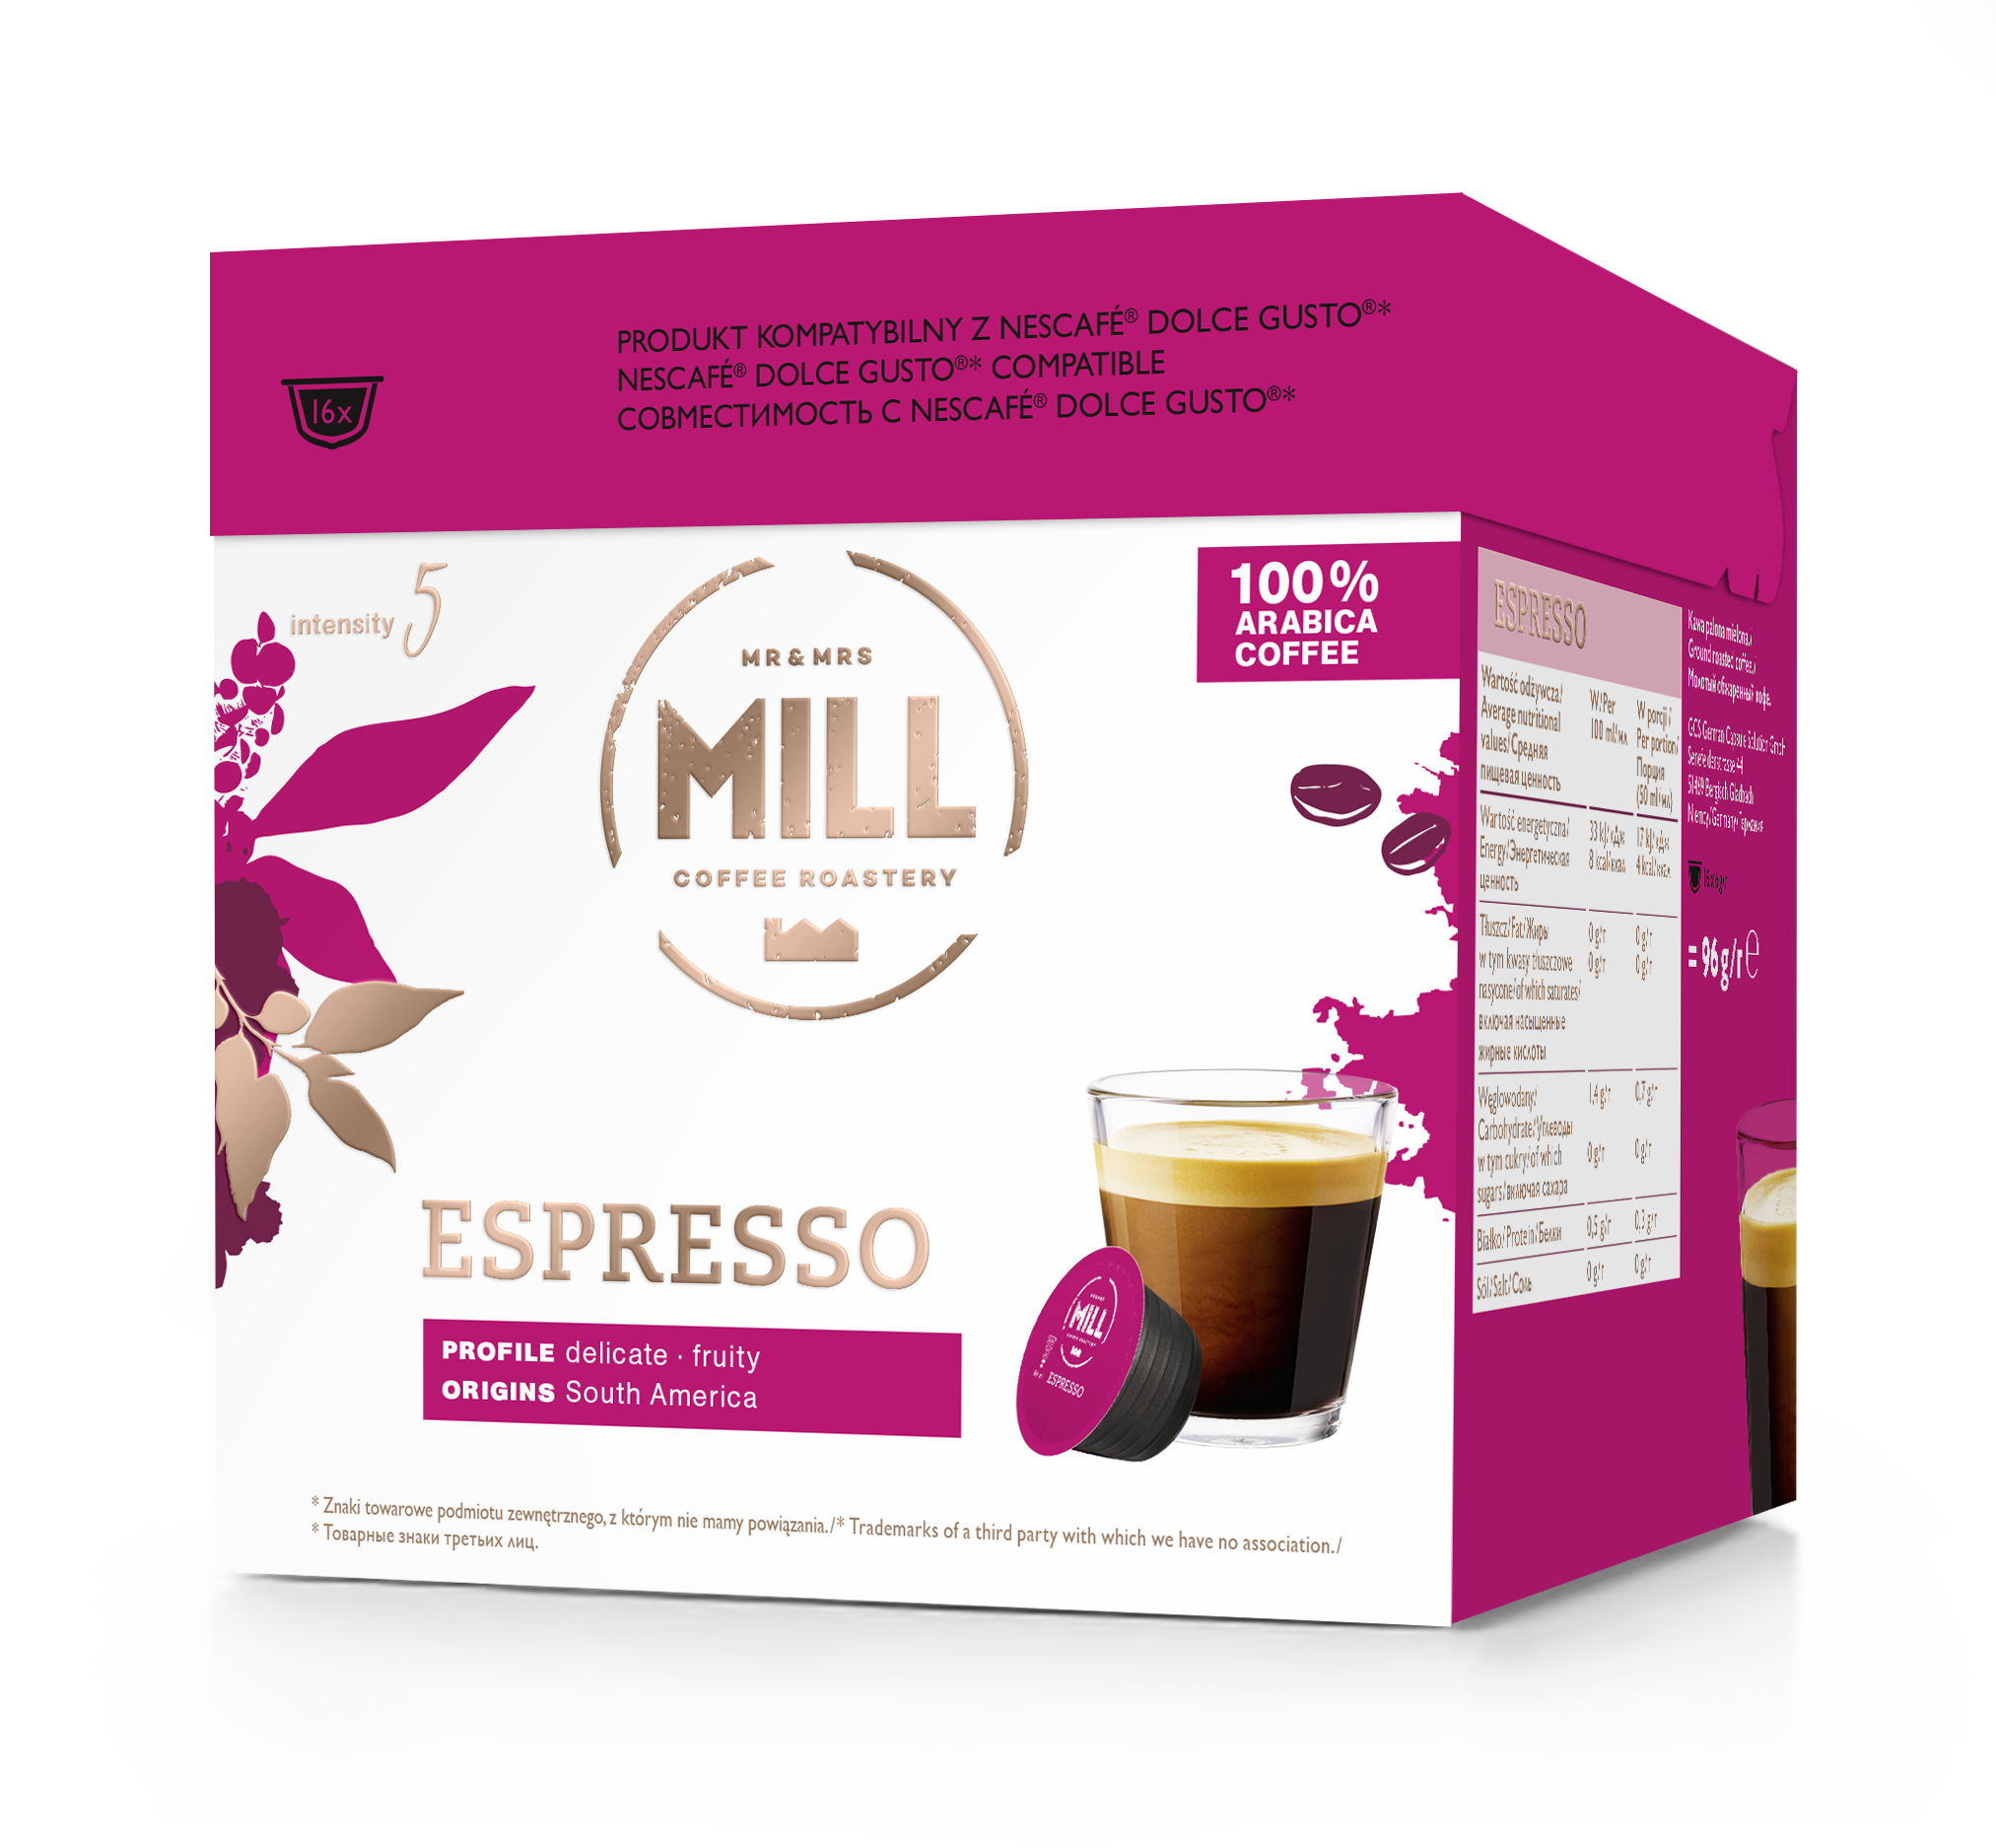 Mr&Mrs Mill Espresso capsules are compatible with Dolce Gusto